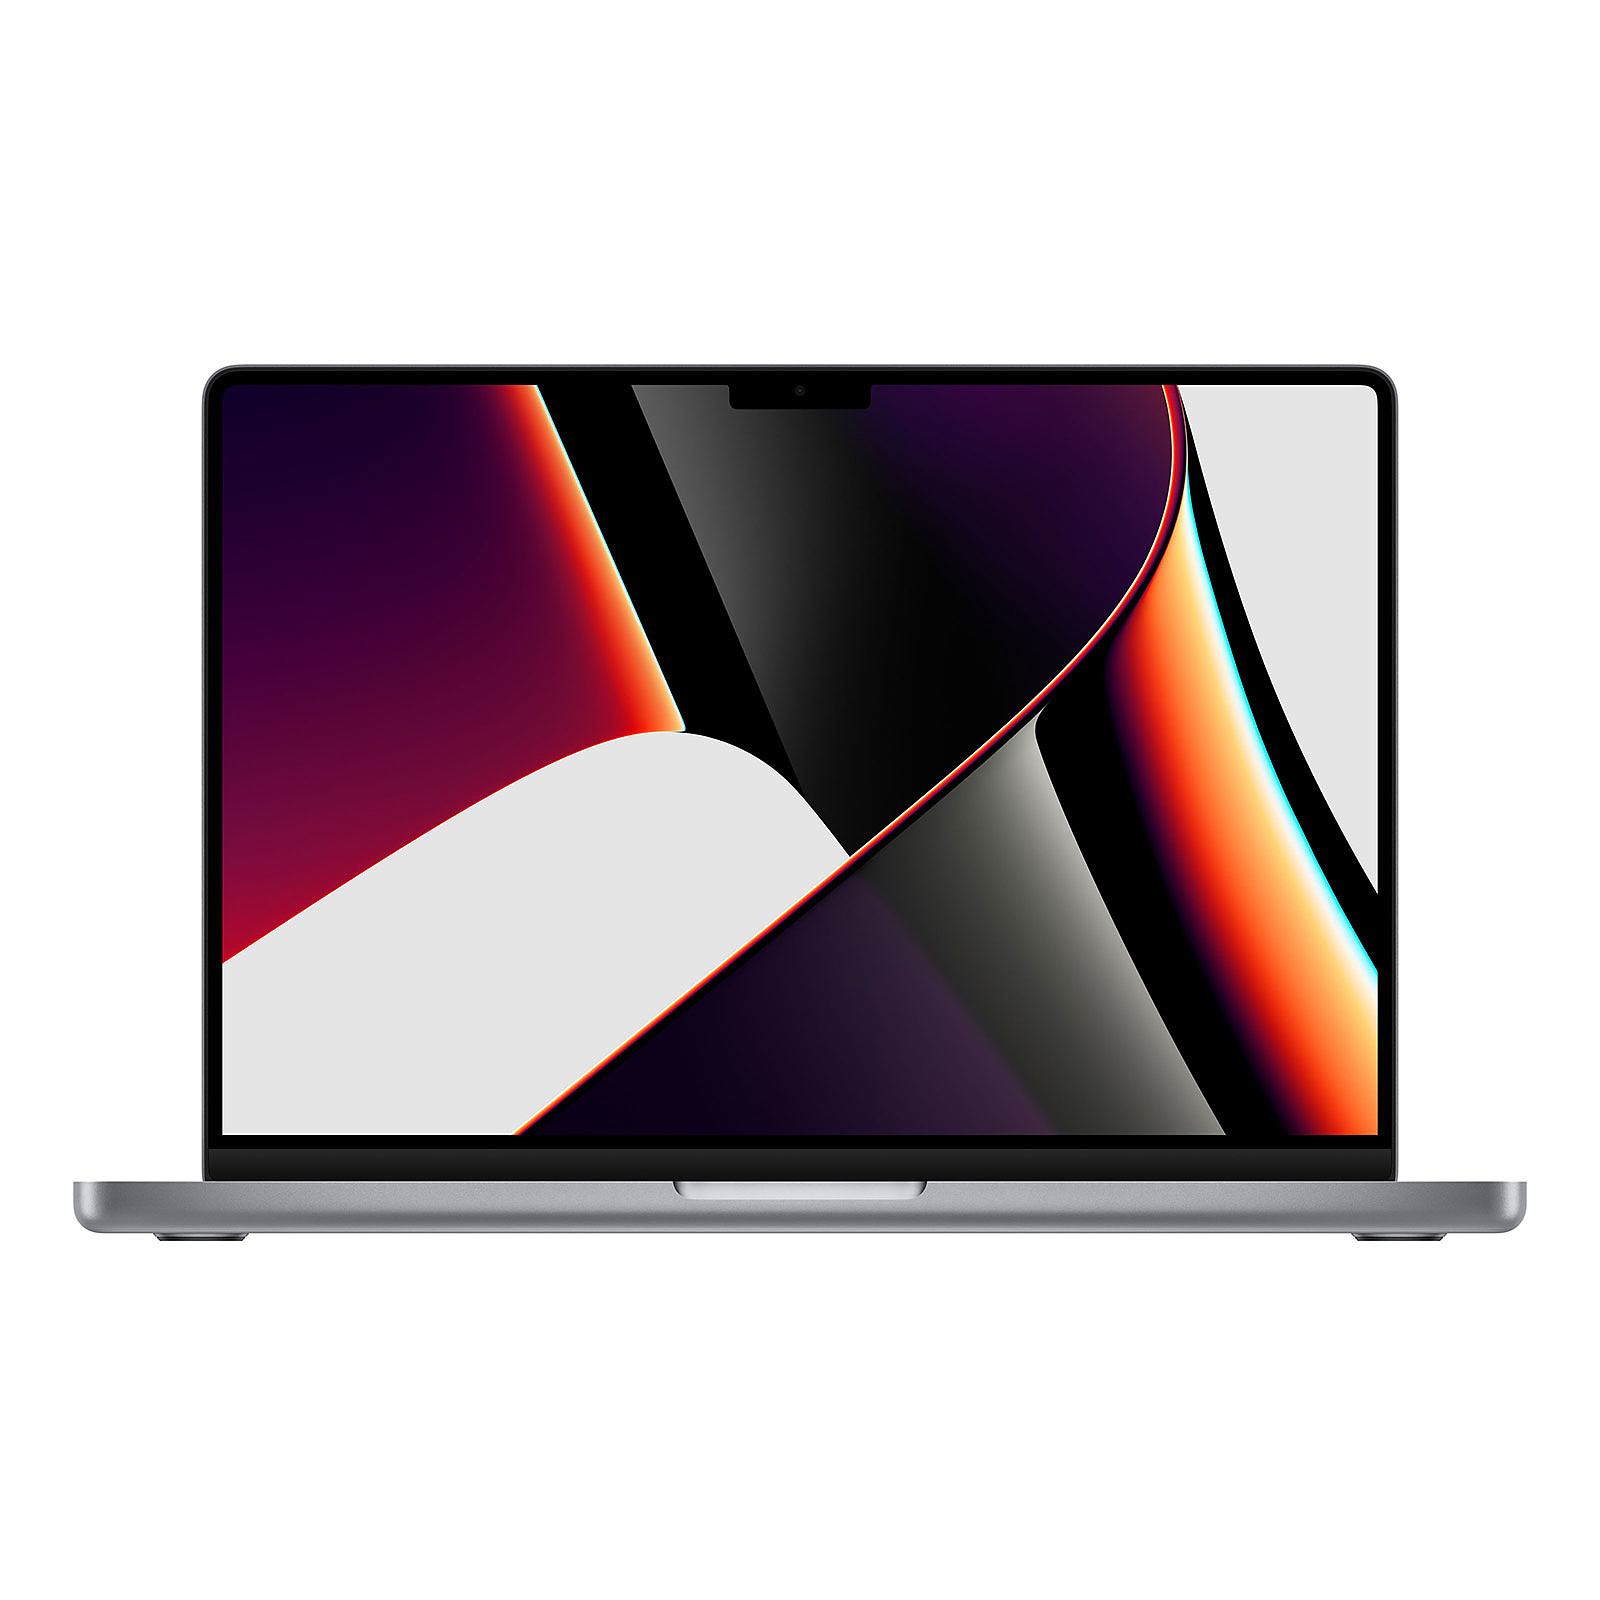 Apple MacBook Pro M1 Pro (2021) 14" Gris sideral 32Go/1To (MKGQ3FN/A-32GB) - MacBook Apple